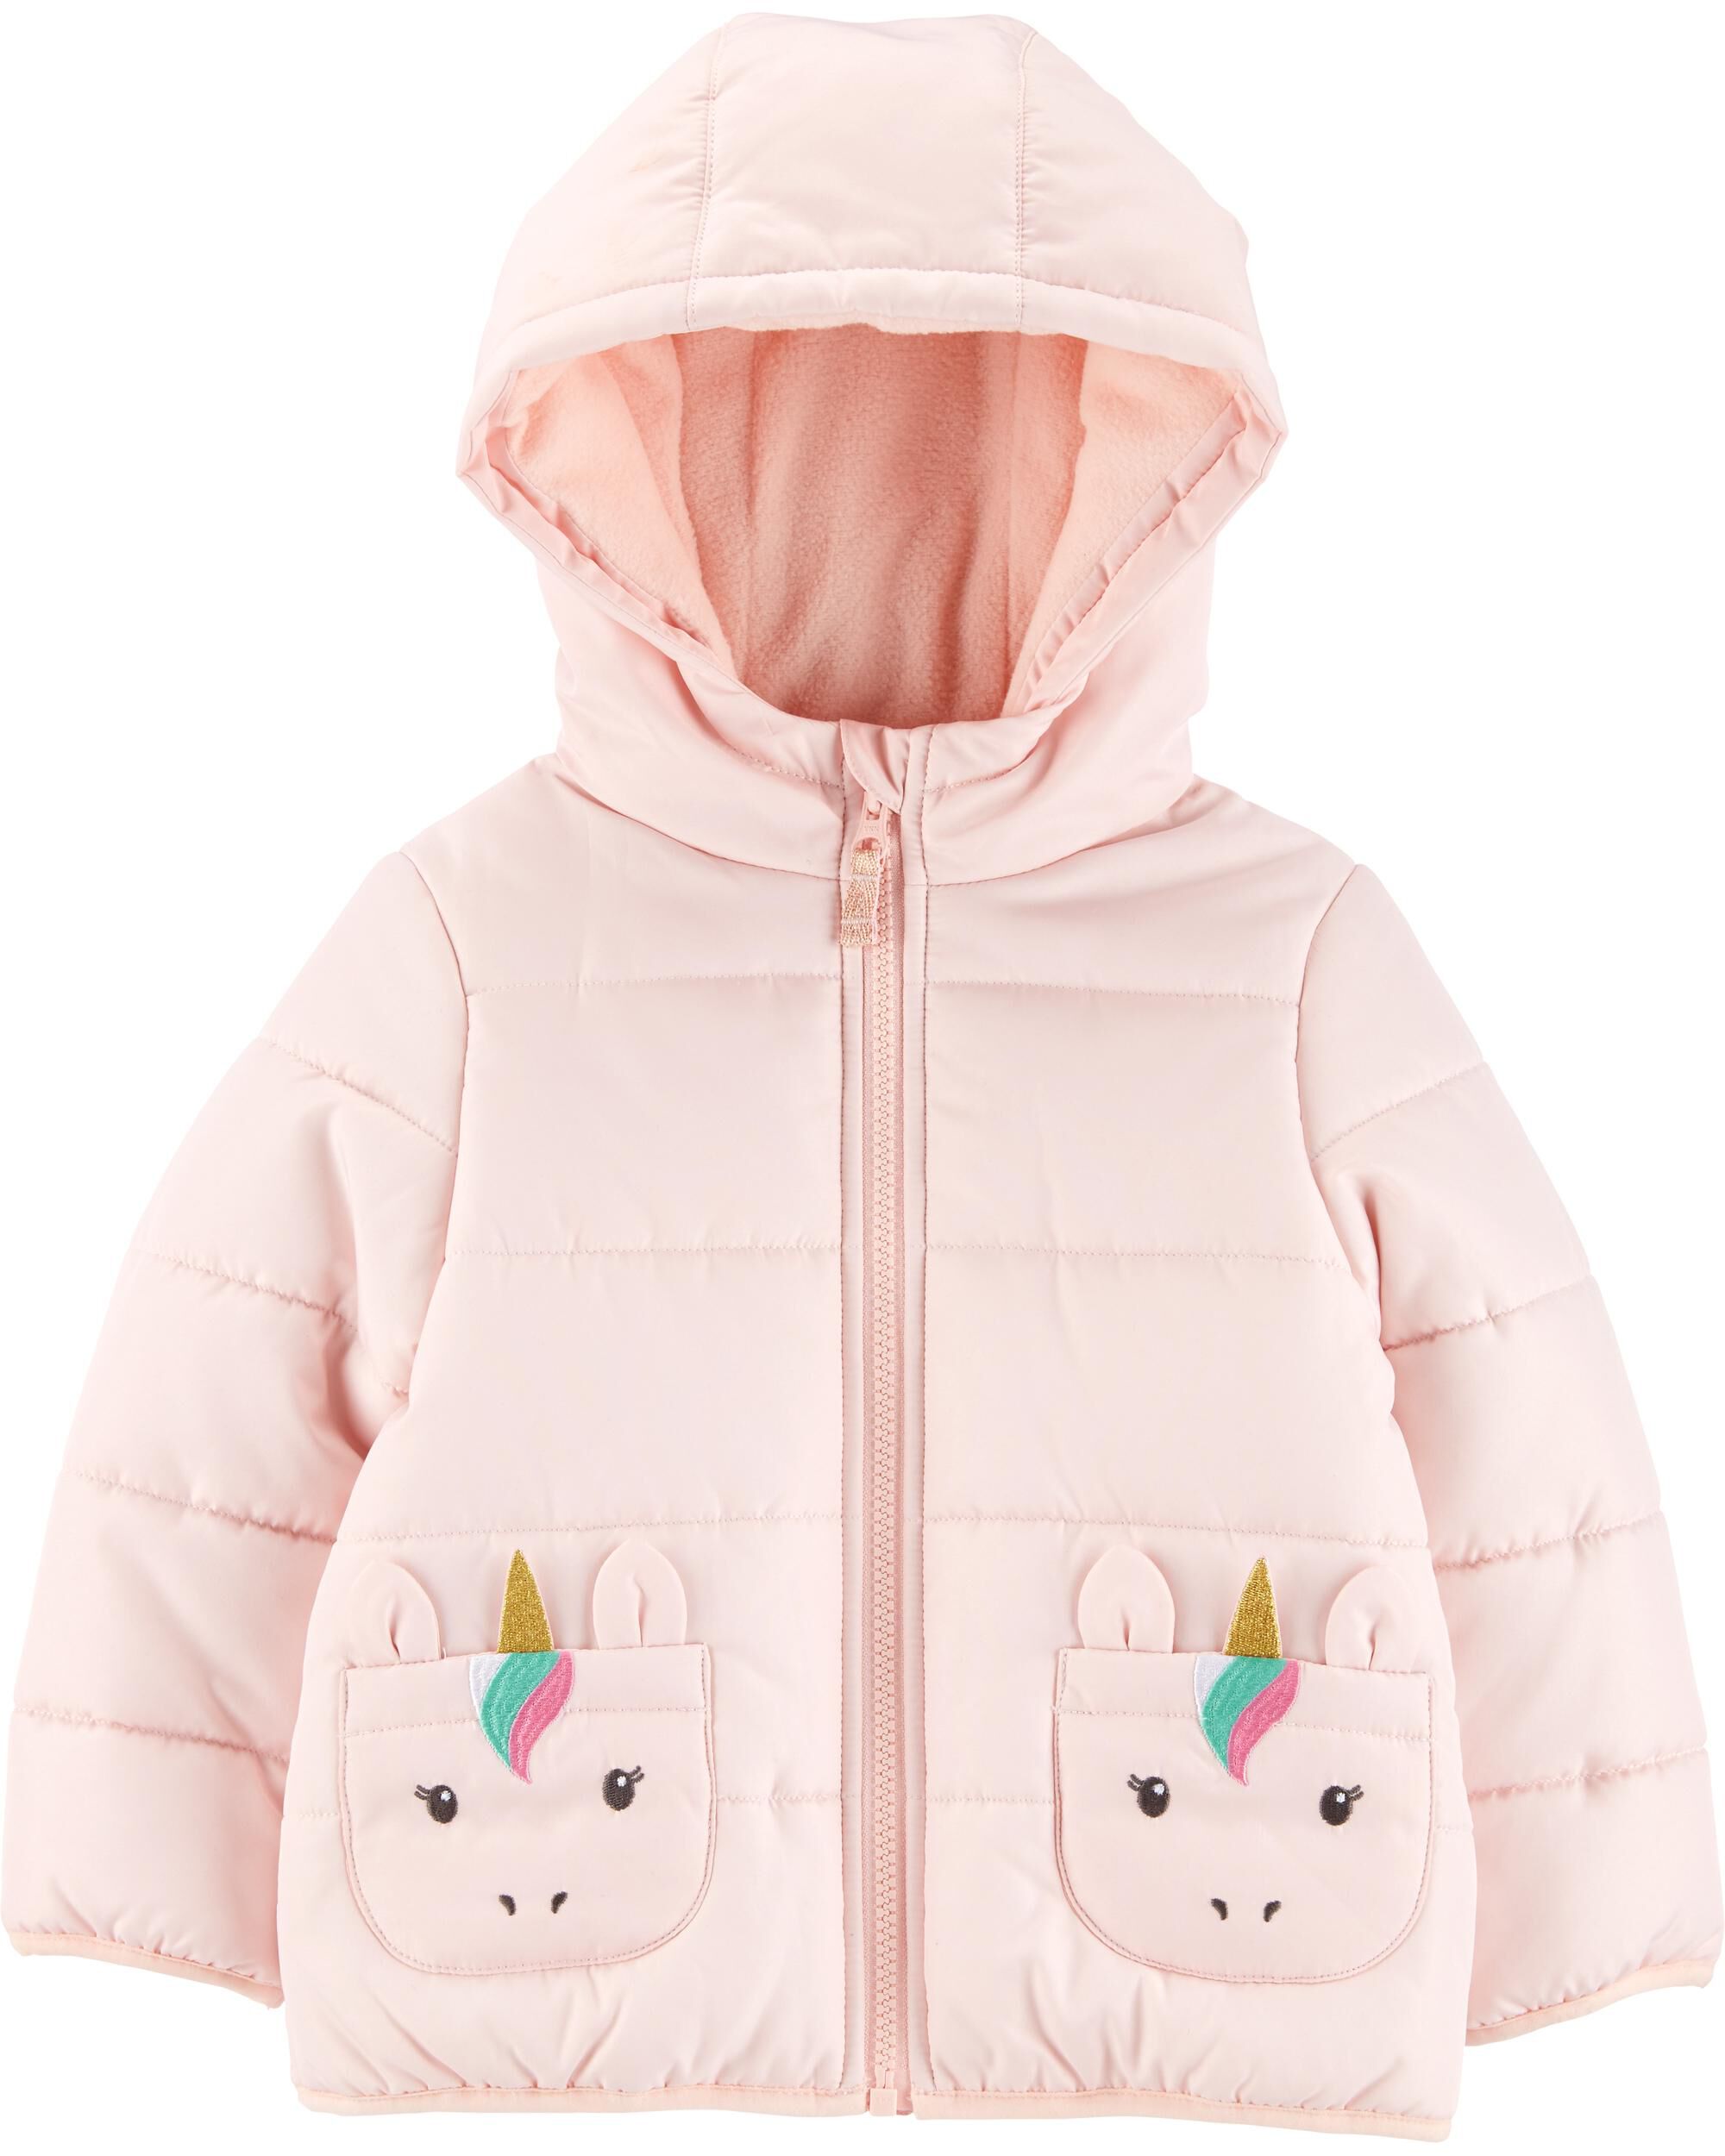 Unicorn Quilted Puffer Jacket | carters.com